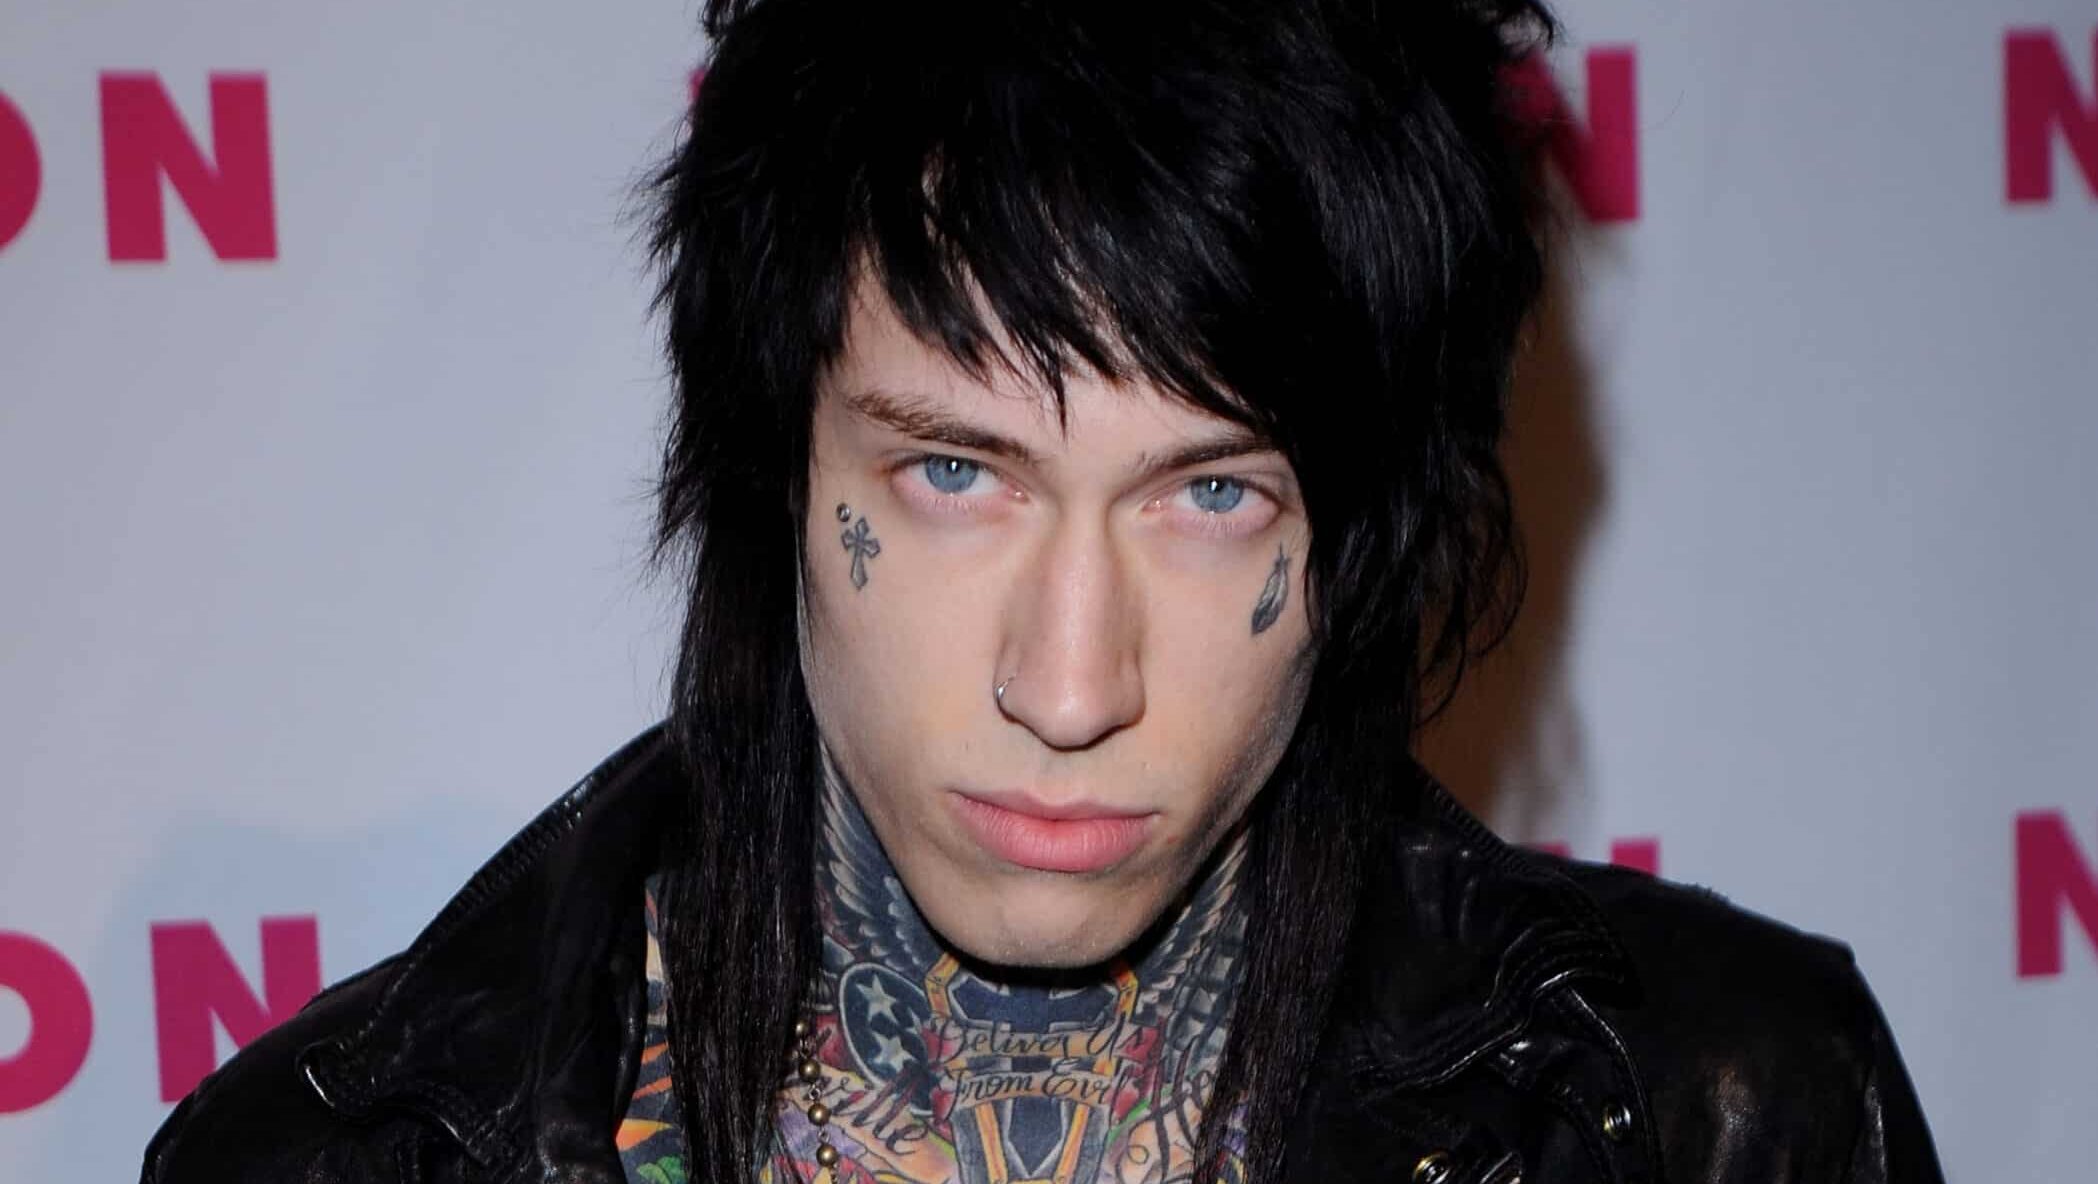 Musician Trace Cyrus arrives at NYLON Magazine's May Issue Young Hollywood Launch Party at The Roosevelt Hotel on May 12, 2010 in Hollywood, California.